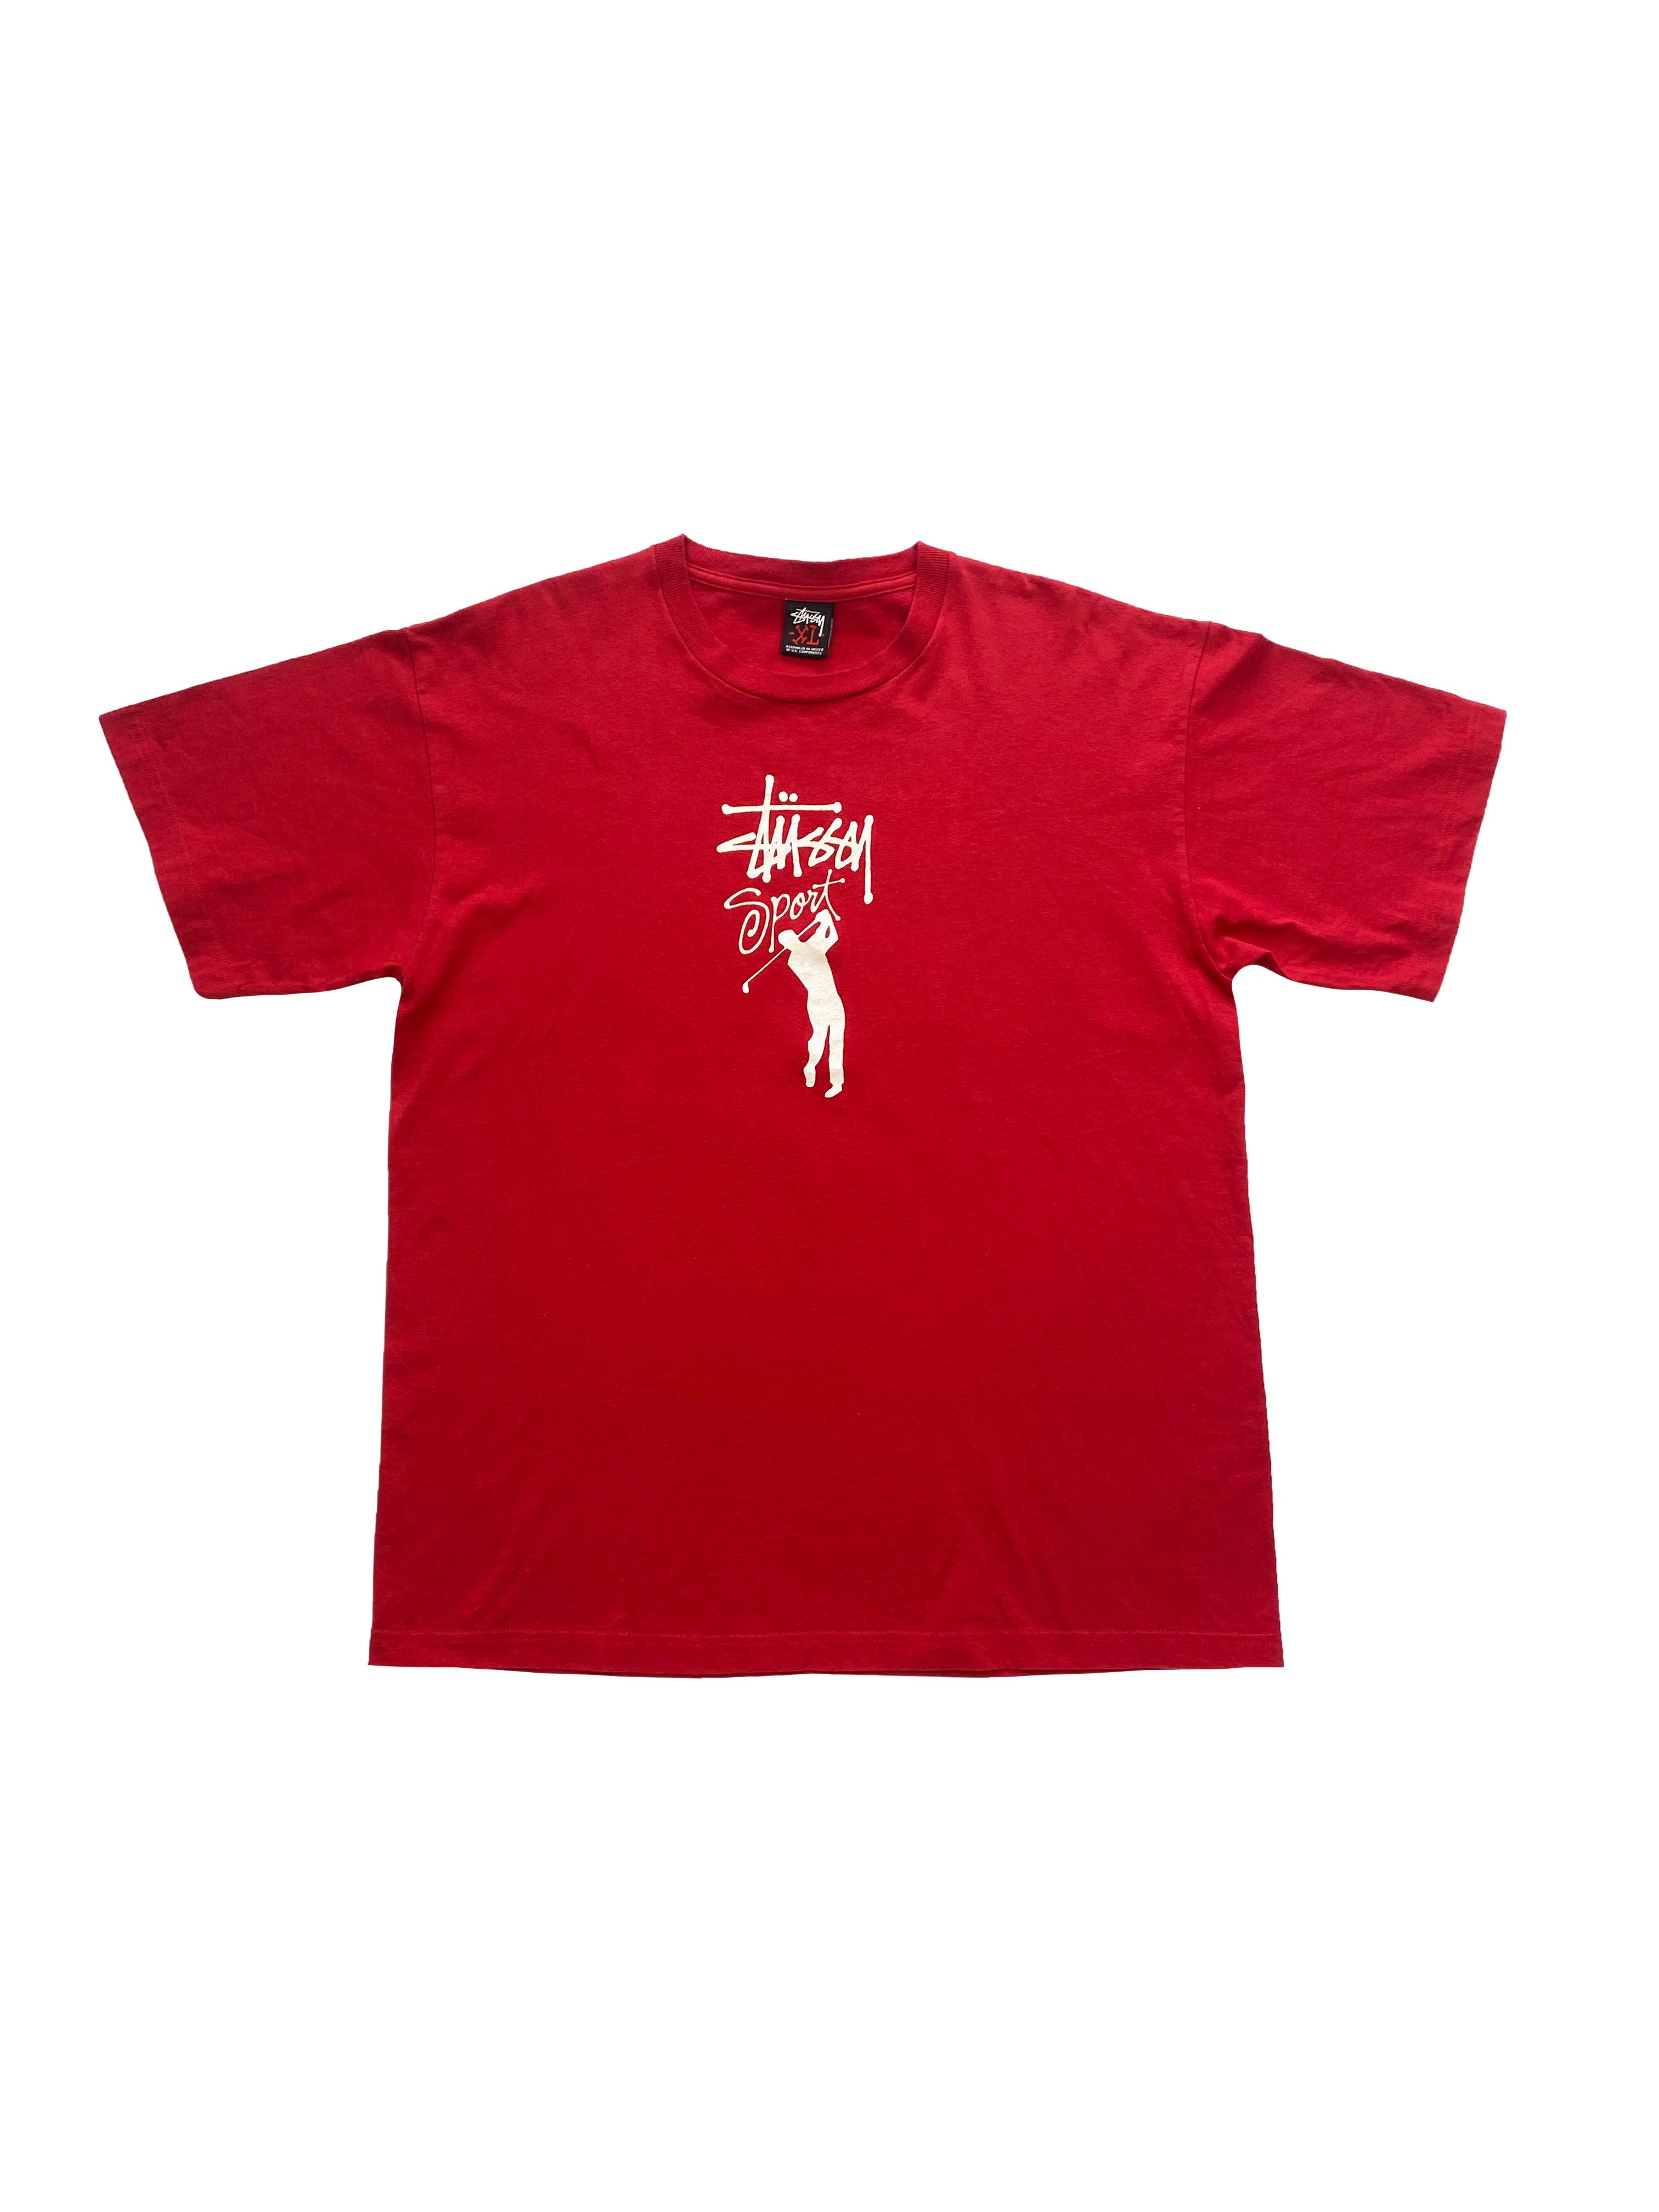 Stussy Sport Red Spell Out T-shirt 00's